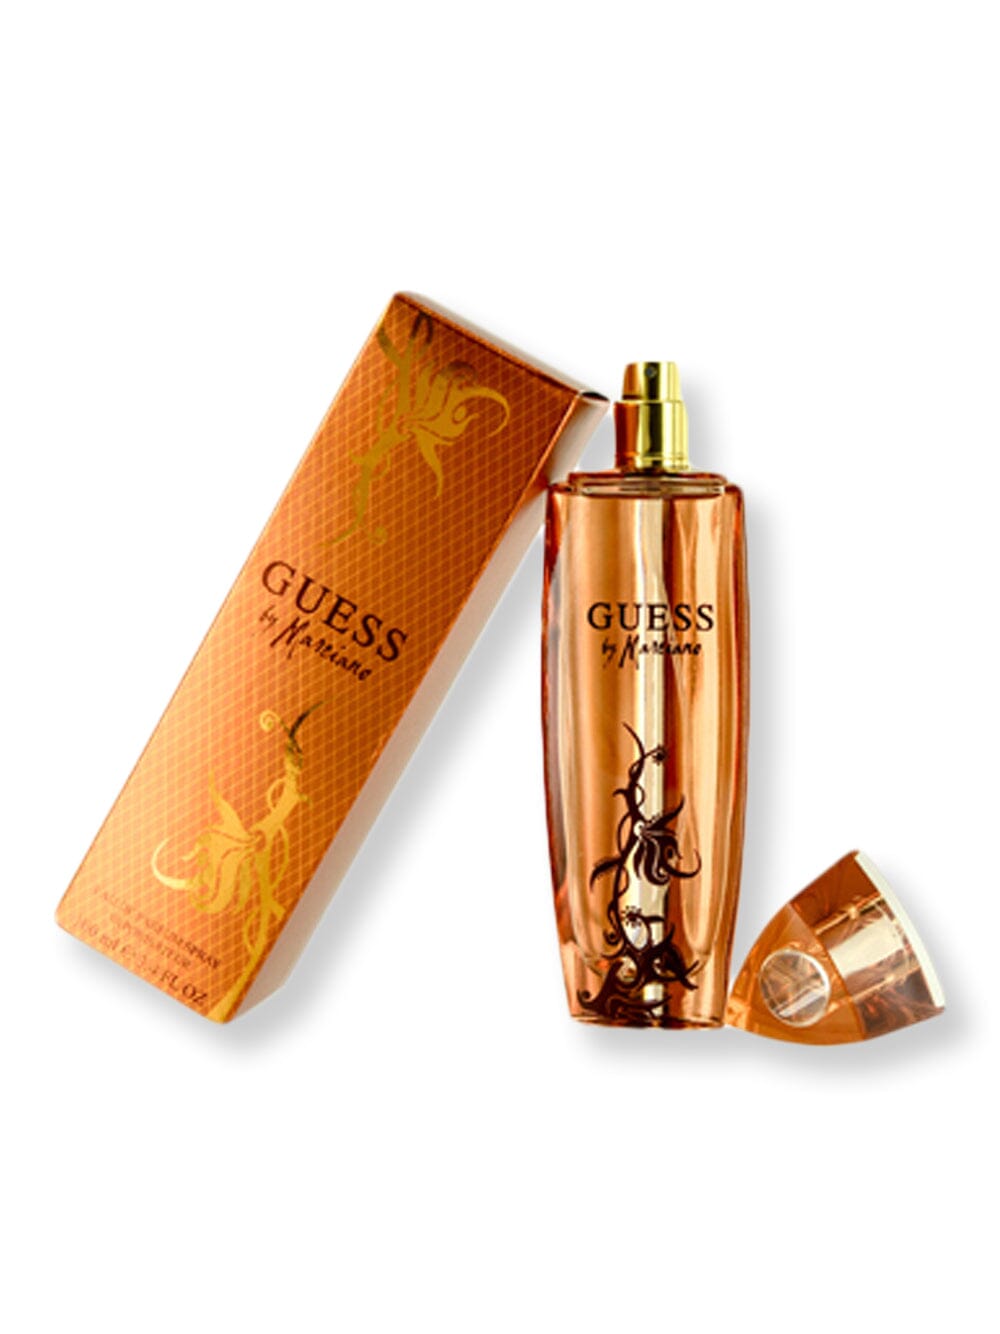 Guess Guess By Marciano EDP Spray 3.4 oz Perfume 